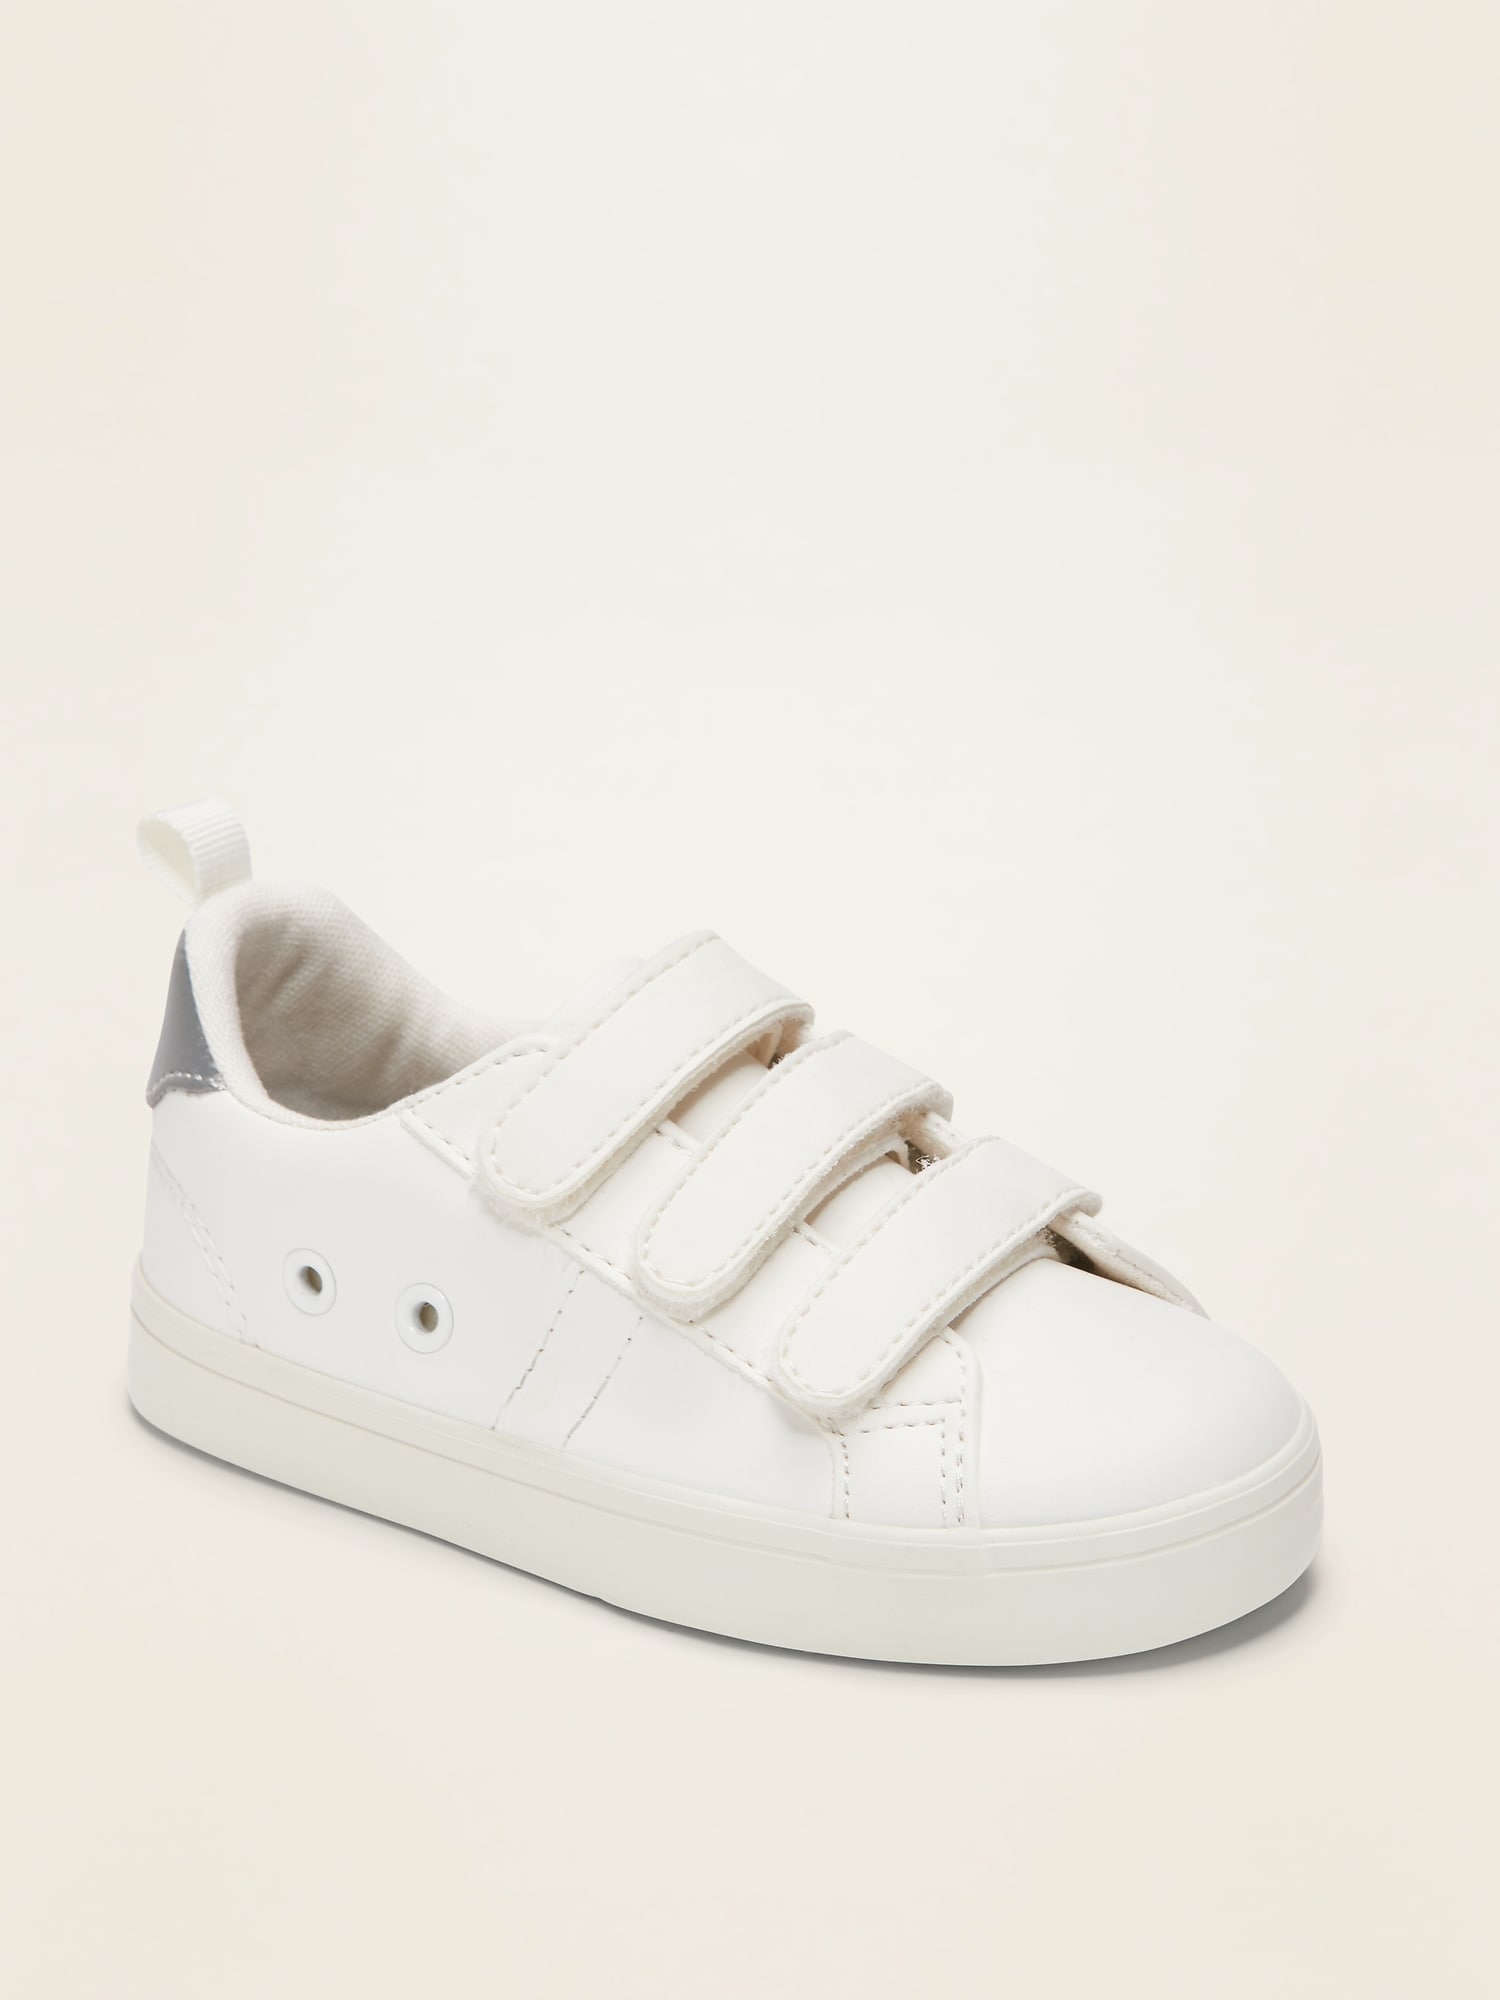 Triple-Strap Sneakers For Toddler Boys 